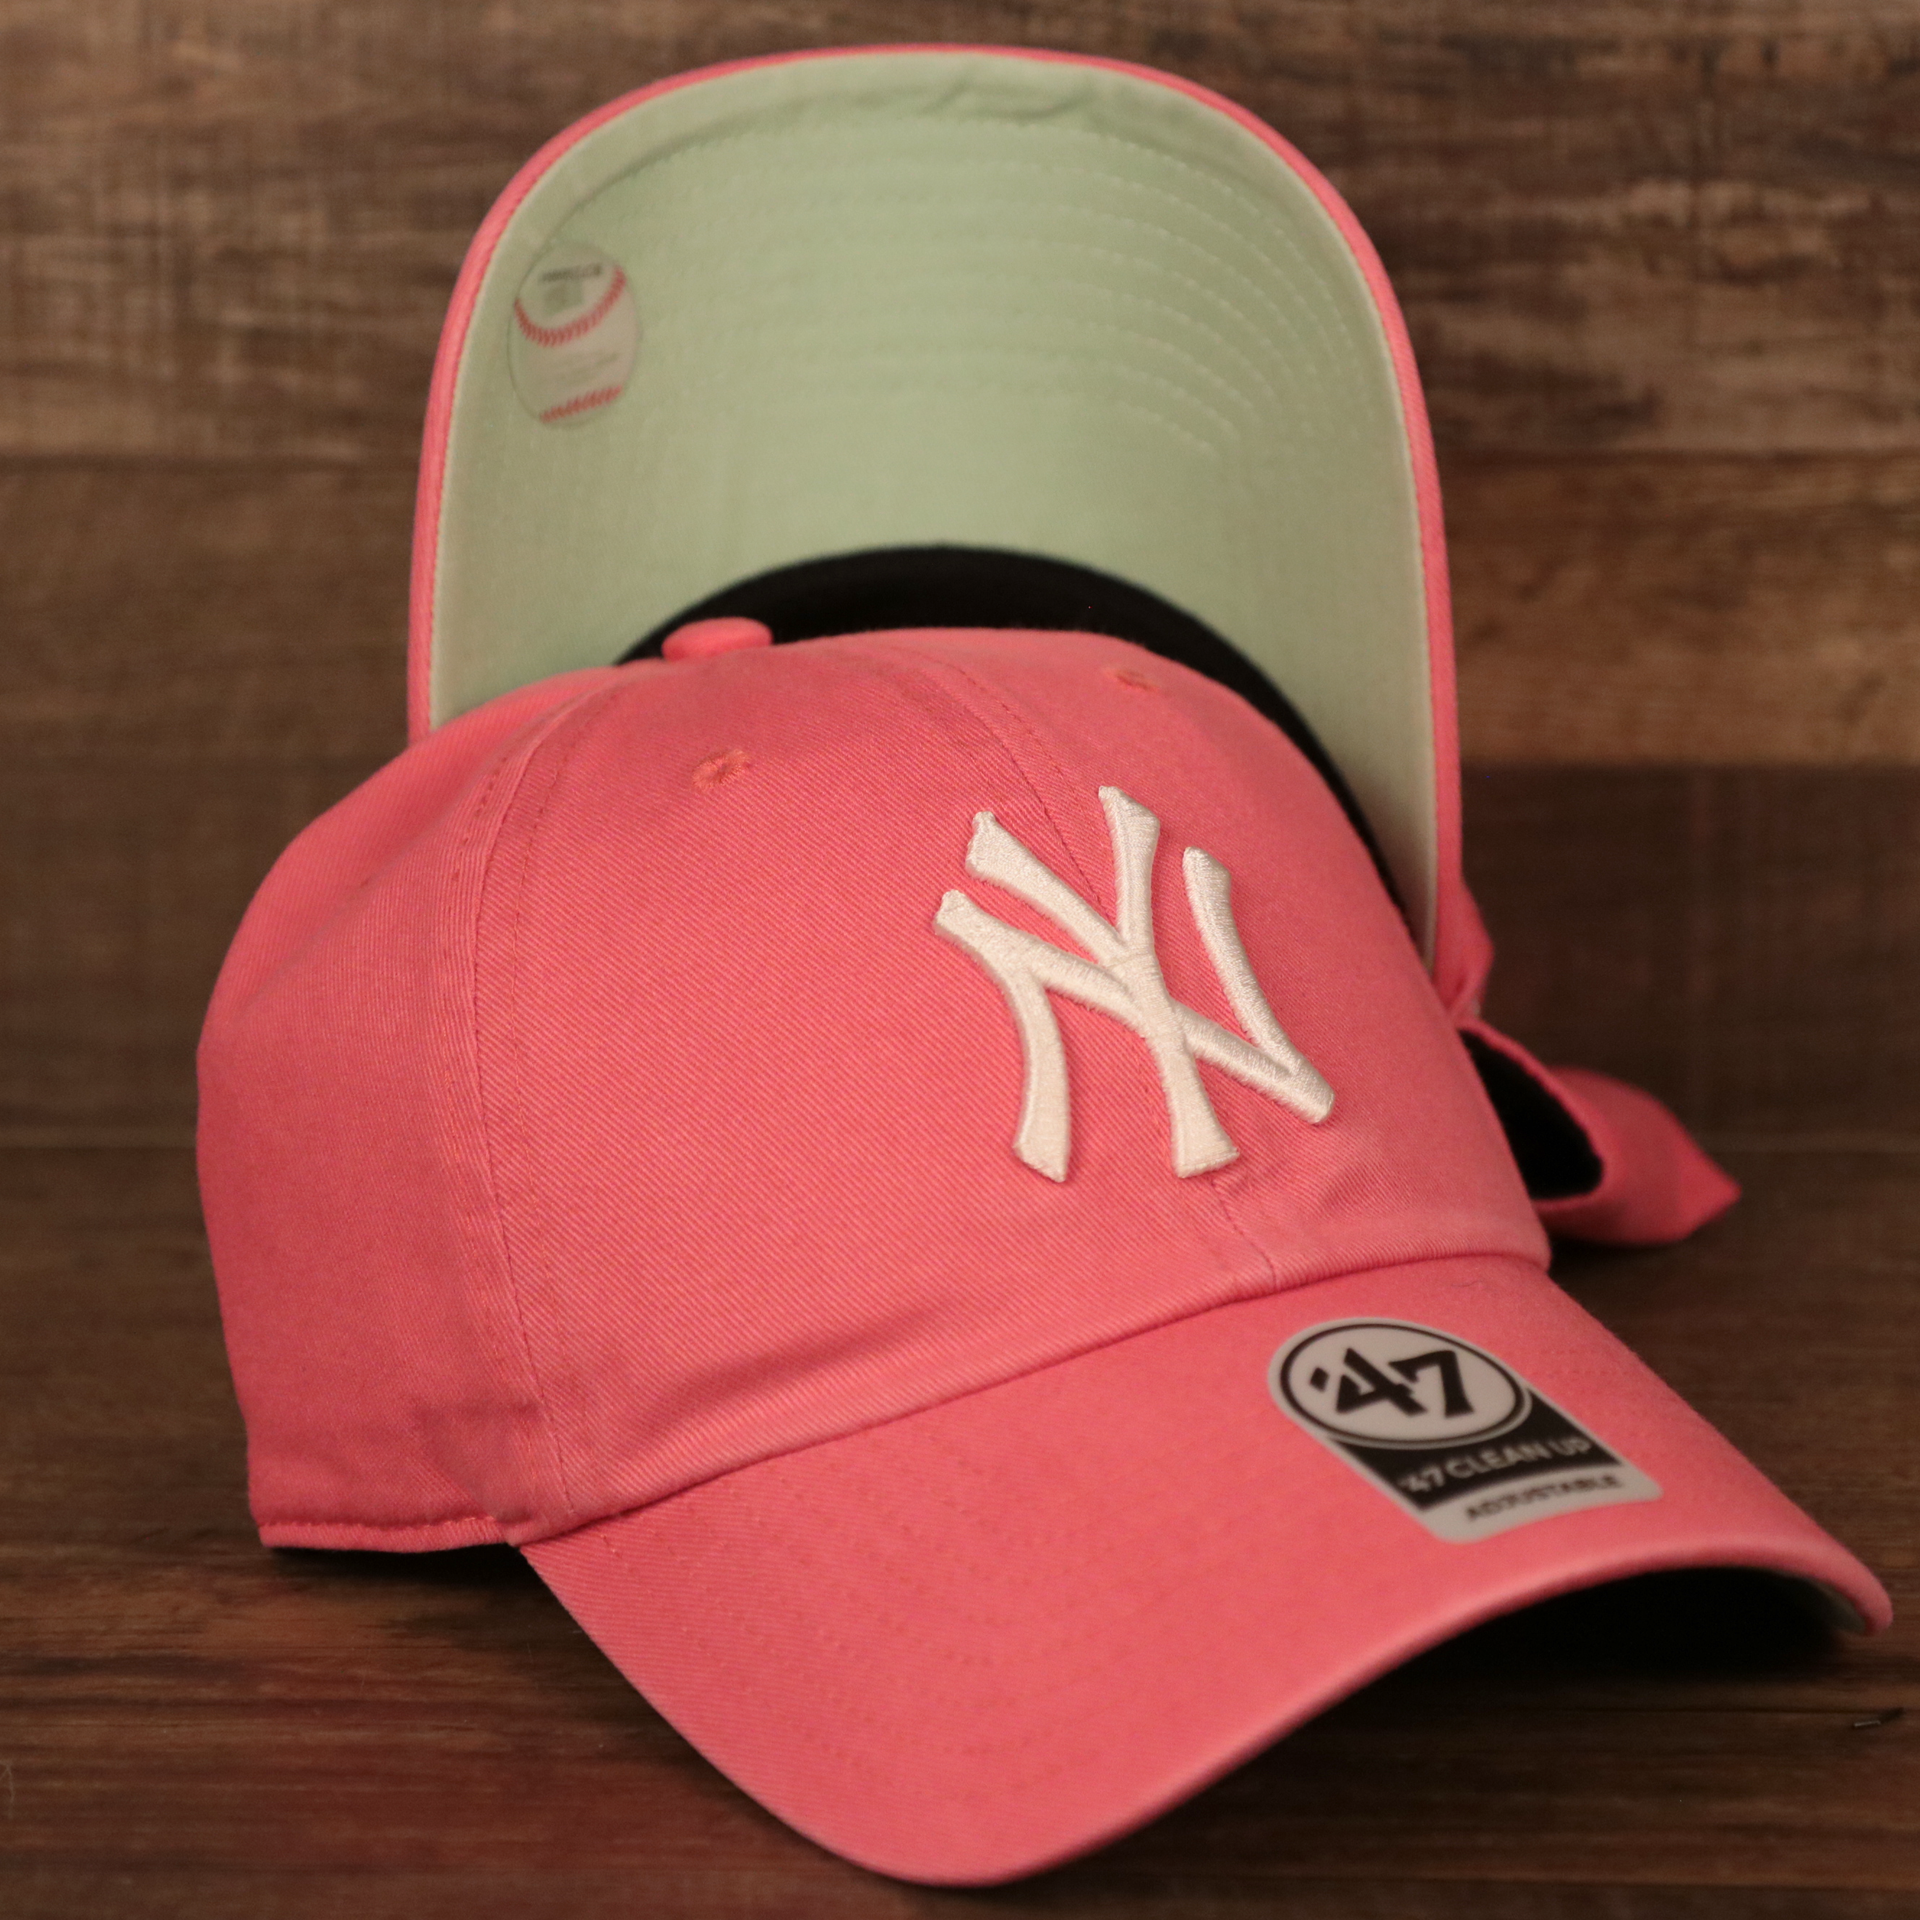 Top and Bottom view of this adjustable New York Yankees green bottom baseball hat.